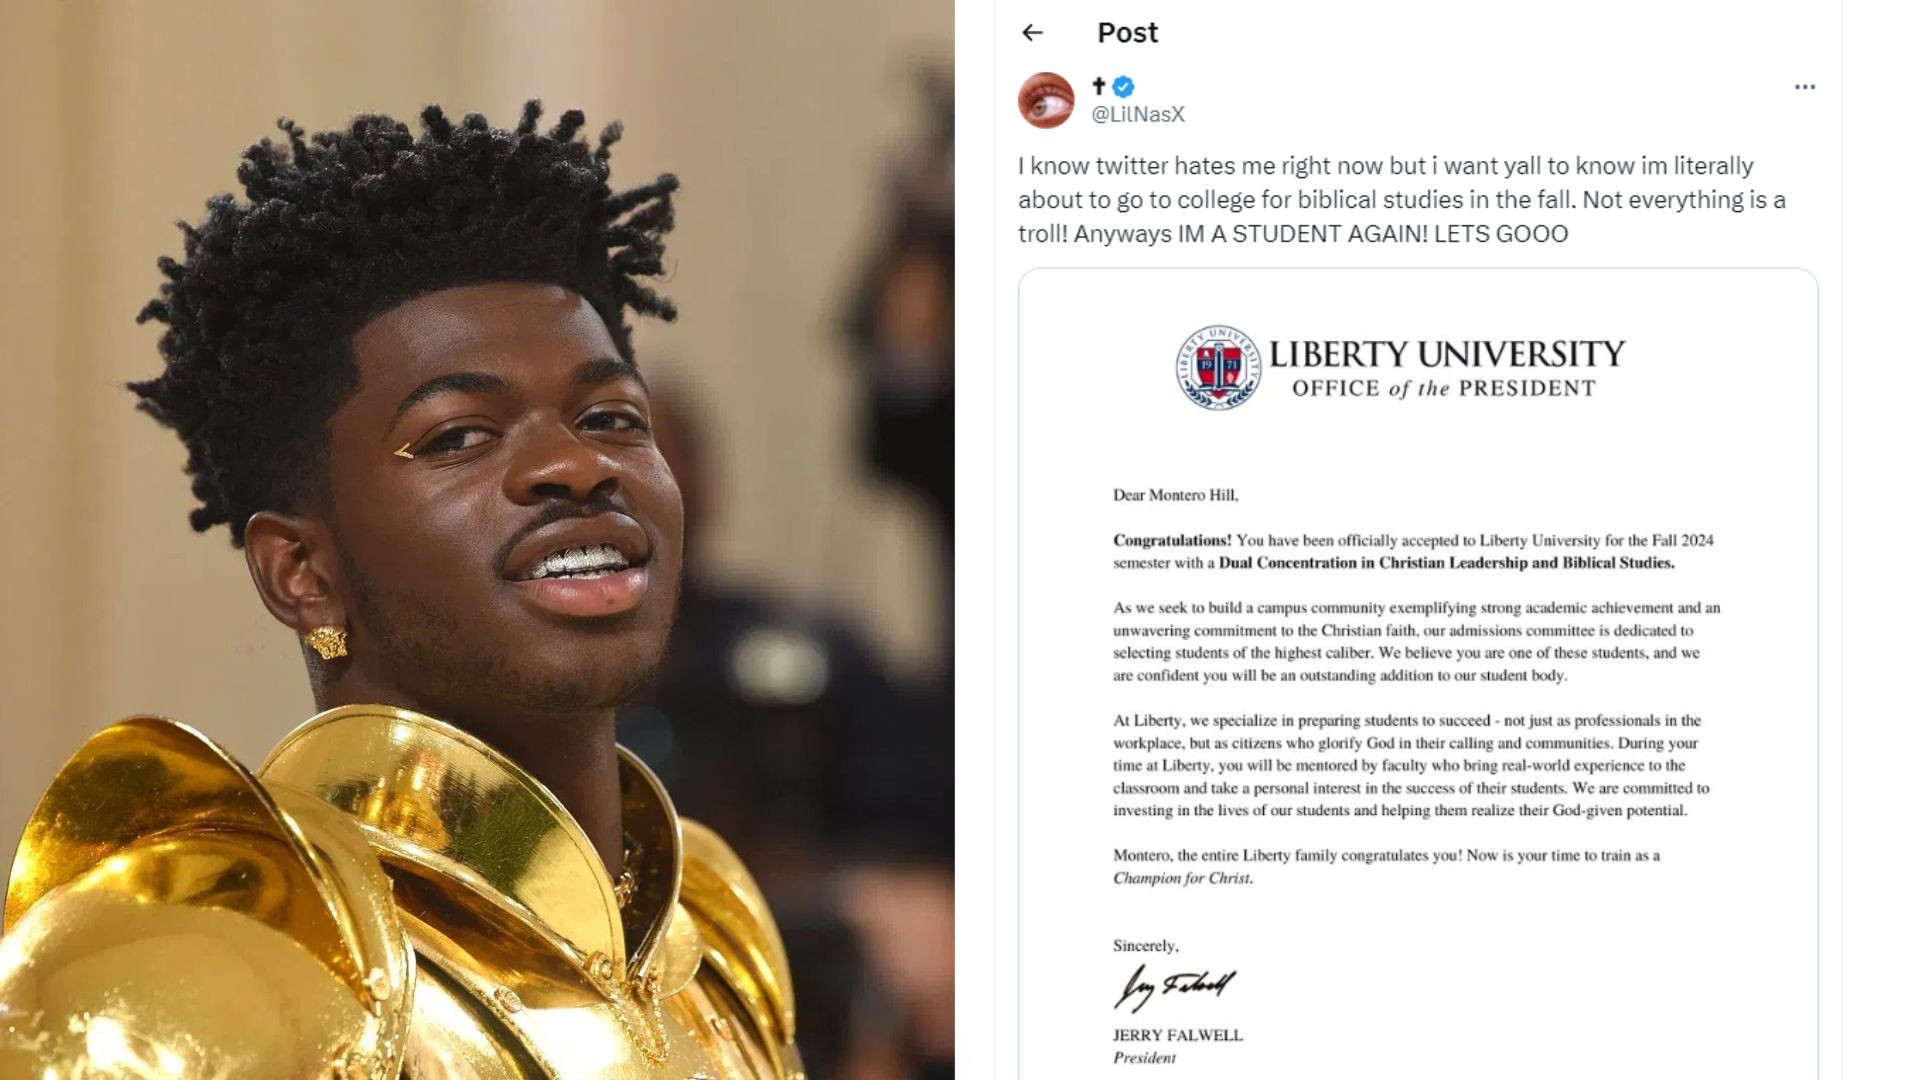 Lil Nas X Falsely Claims Acceptance To Christian Liberty University